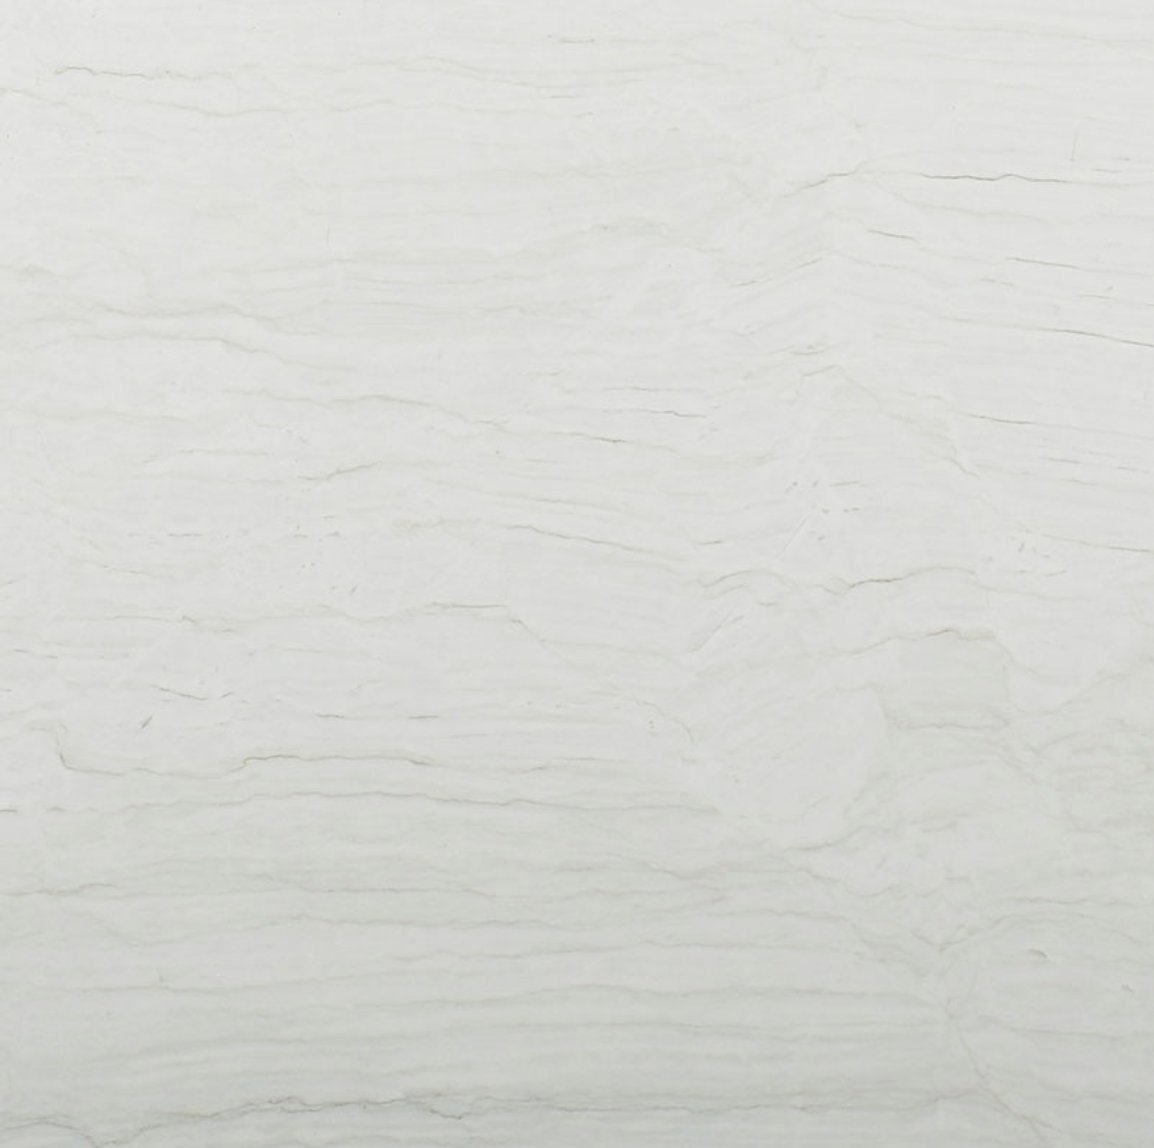 MSI surfaces quartzite slab White Montreal features a white background with waves of grey.
.
.
.
#countertops #countertop #countertopslab #countertopideas #countertopdesigns #countertopskitchen #quartzite #quartzitecountertops